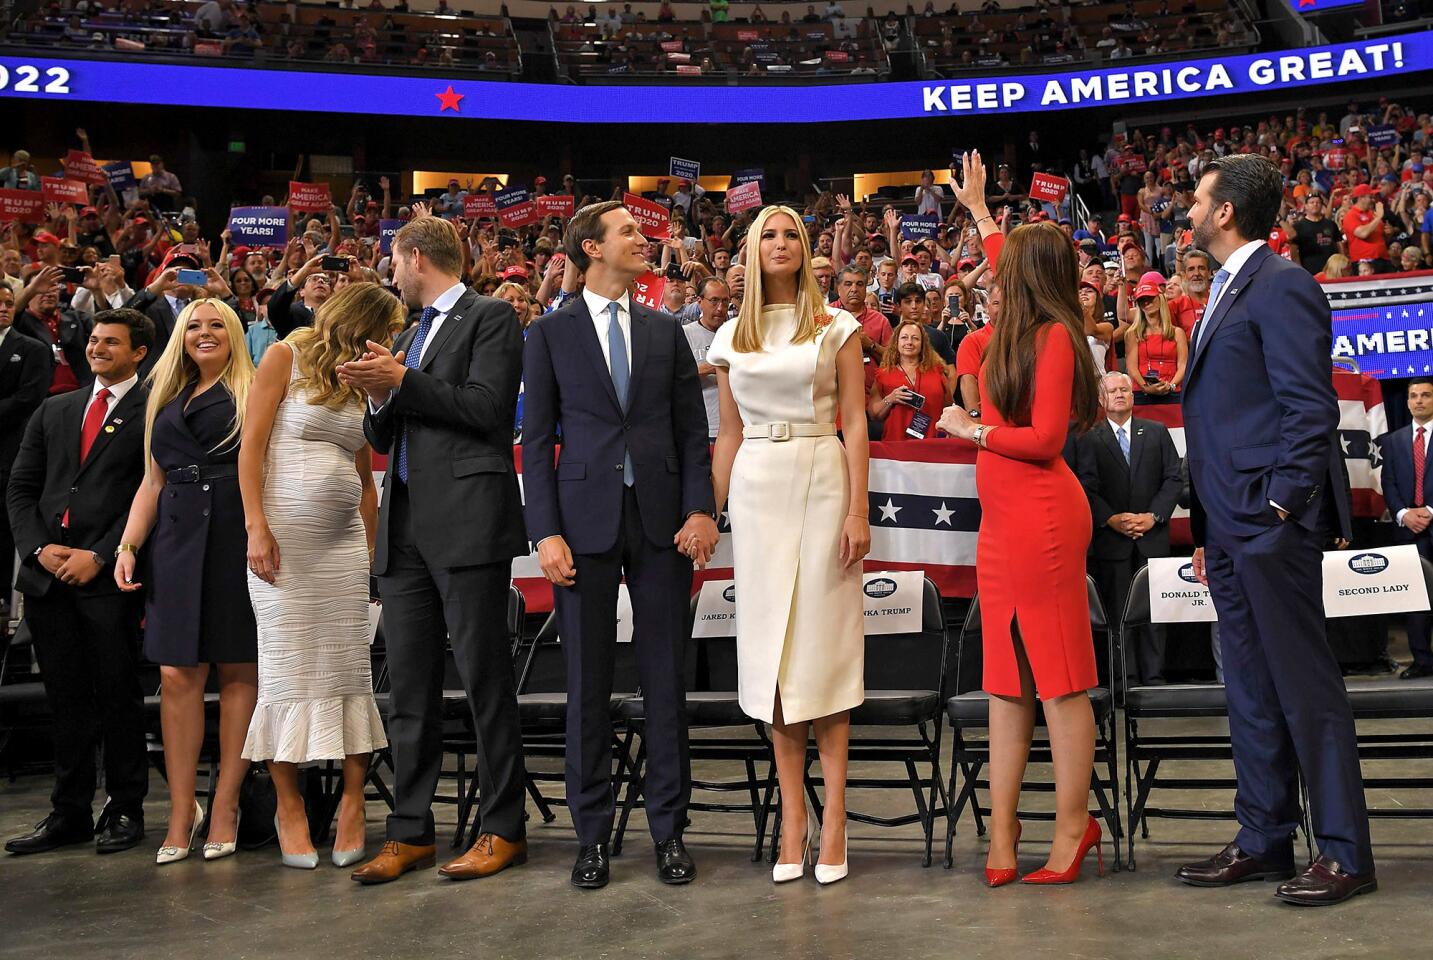 The president's children attend the launch of his campaign.